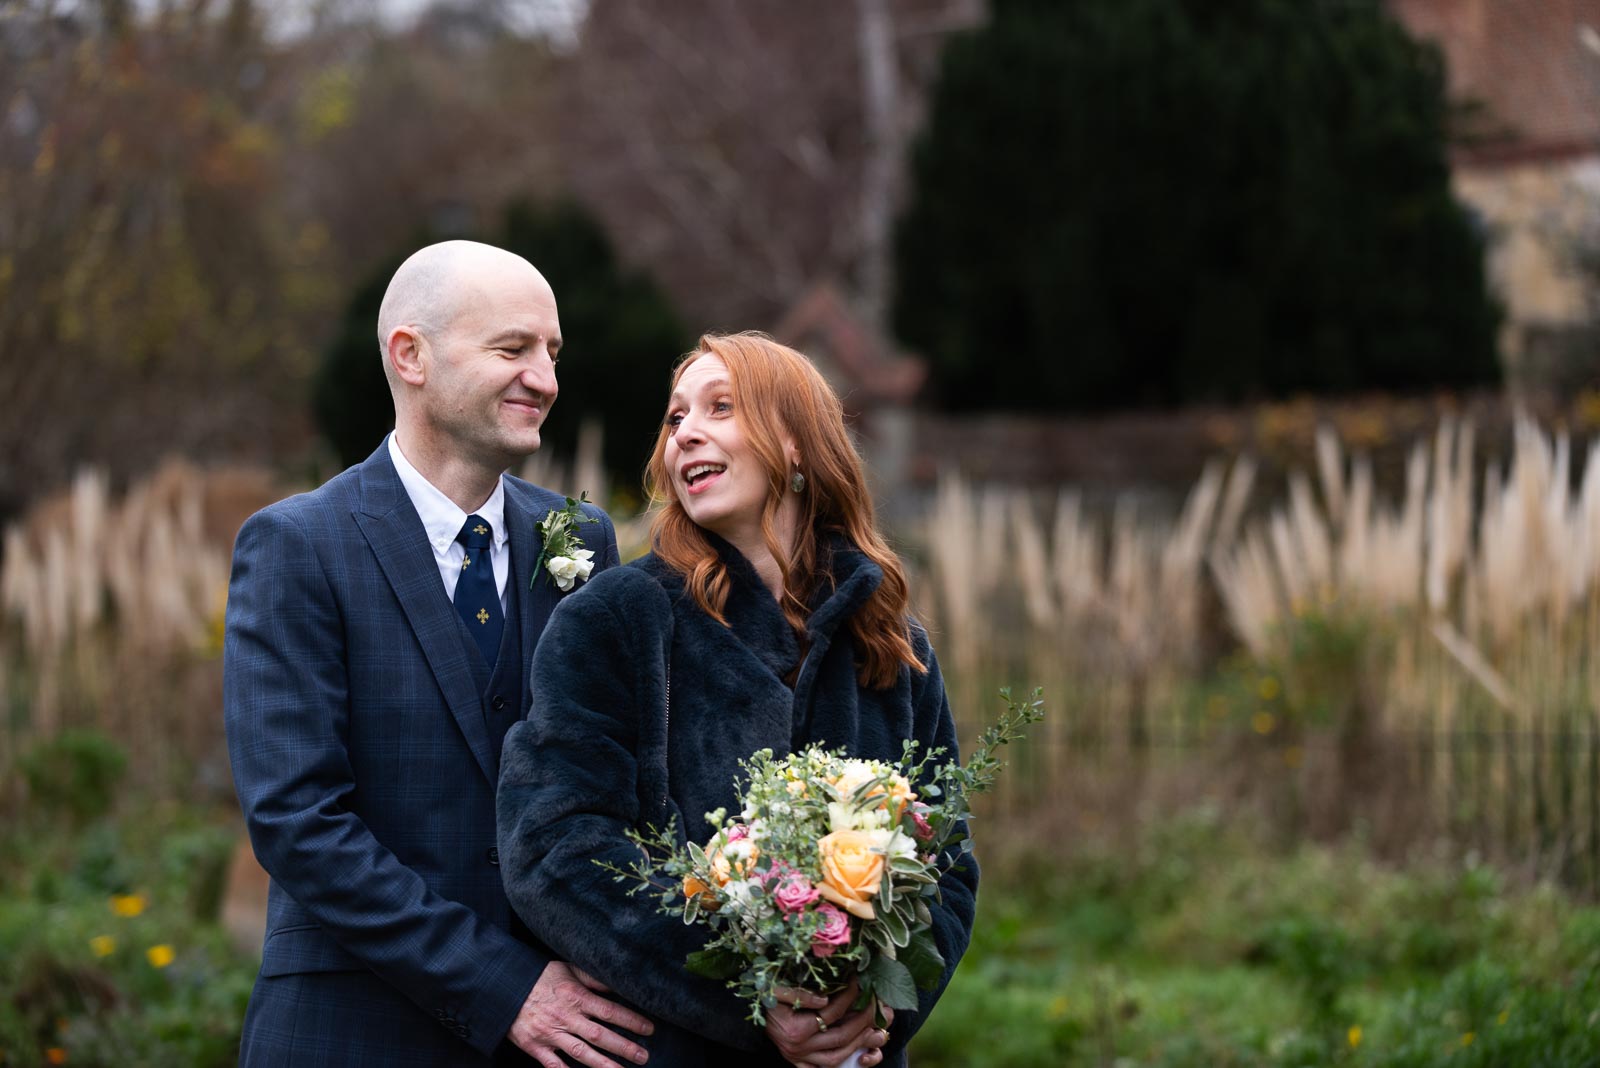 Melanie and Ryan smile at each other in Southover Grange after their wedding at Lewes Register Office.